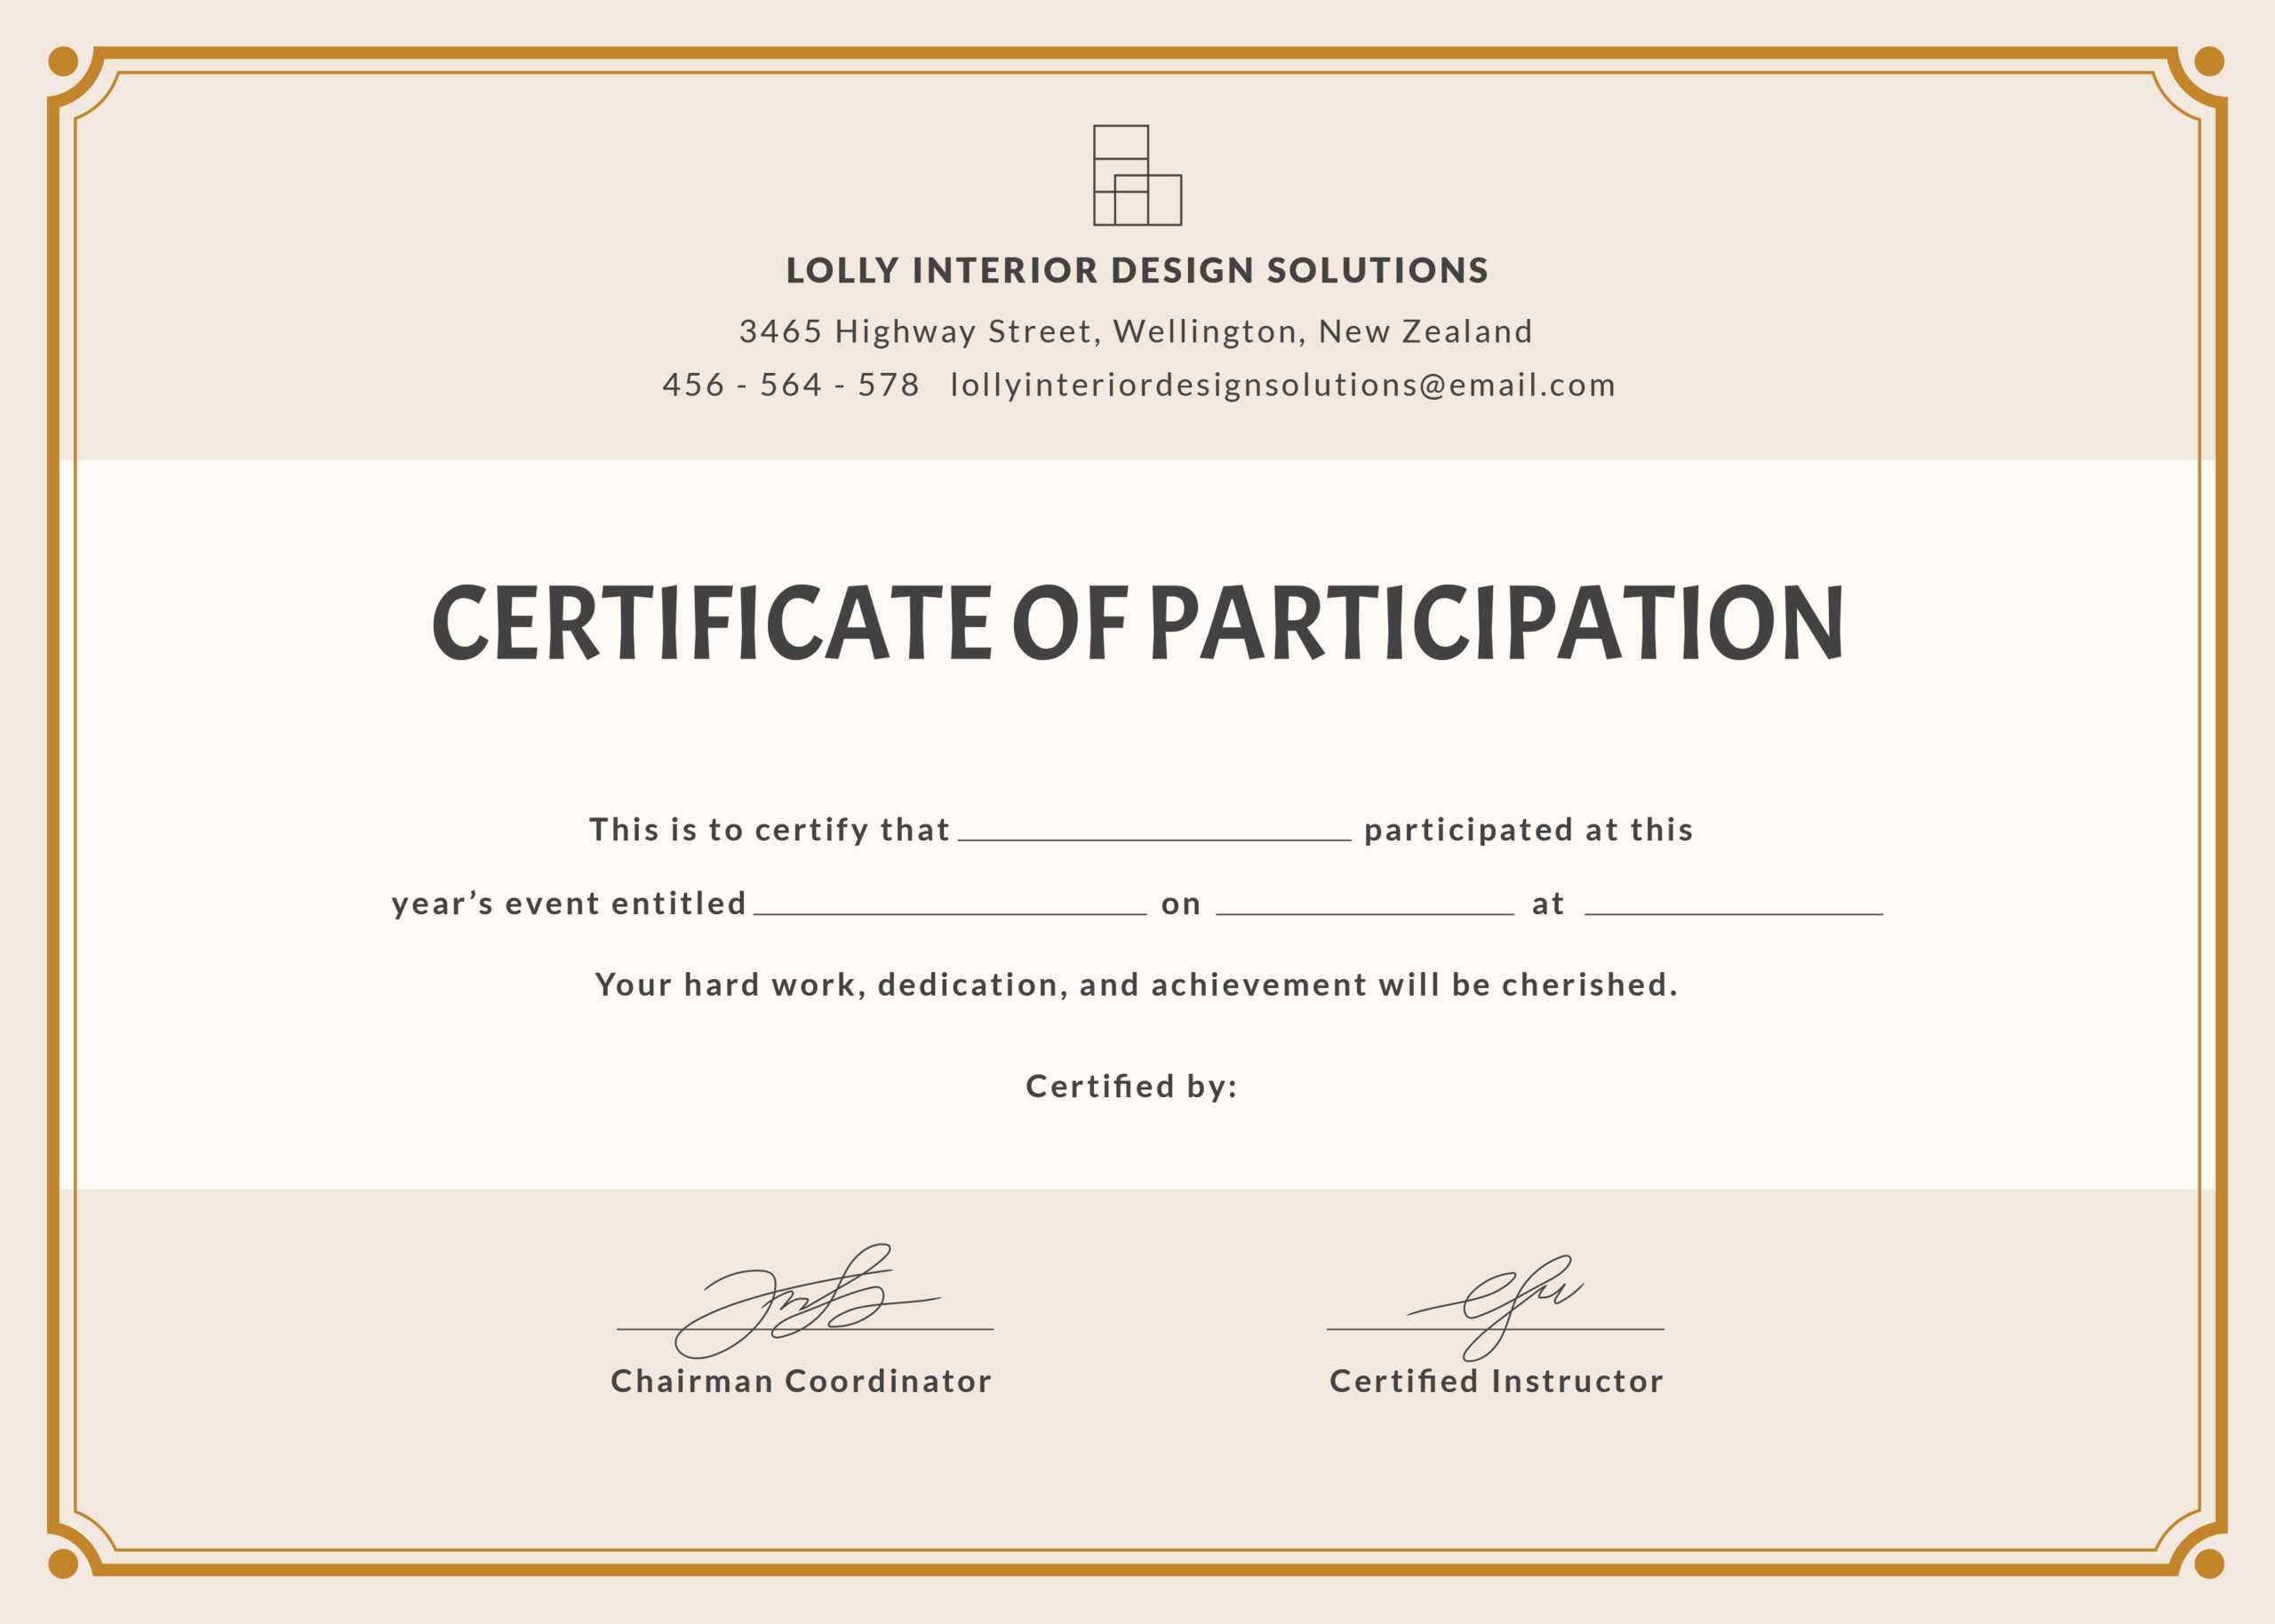 Templates For Certificates Of Participation - Calep Within Templates For Certificates Of Participation